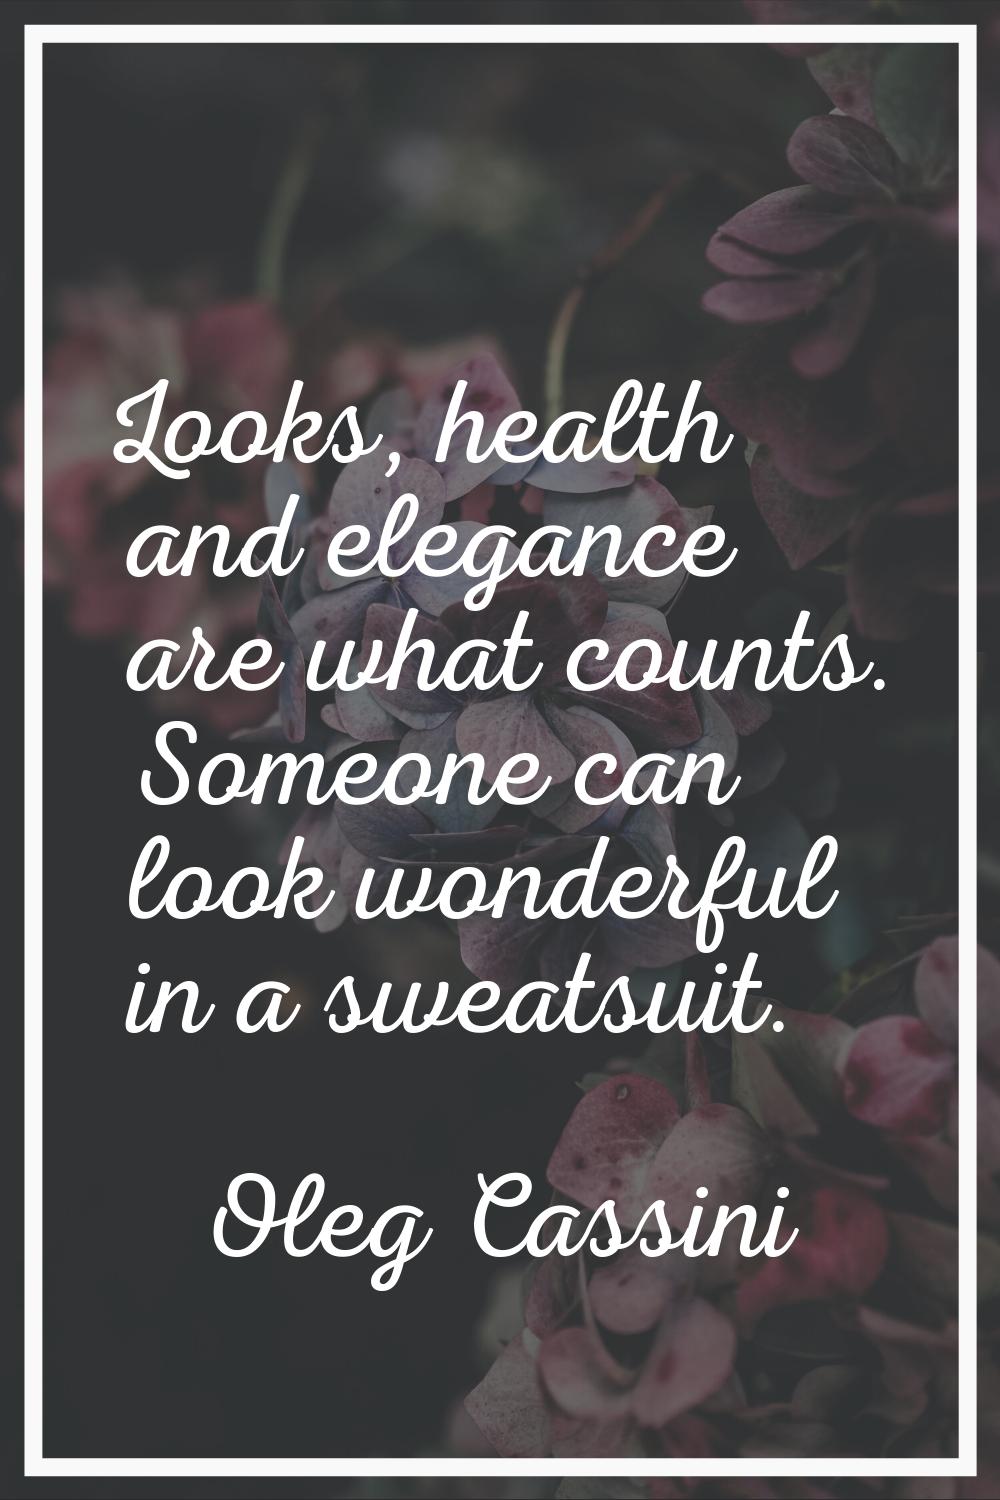 Looks, health and elegance are what counts. Someone can look wonderful in a sweatsuit.